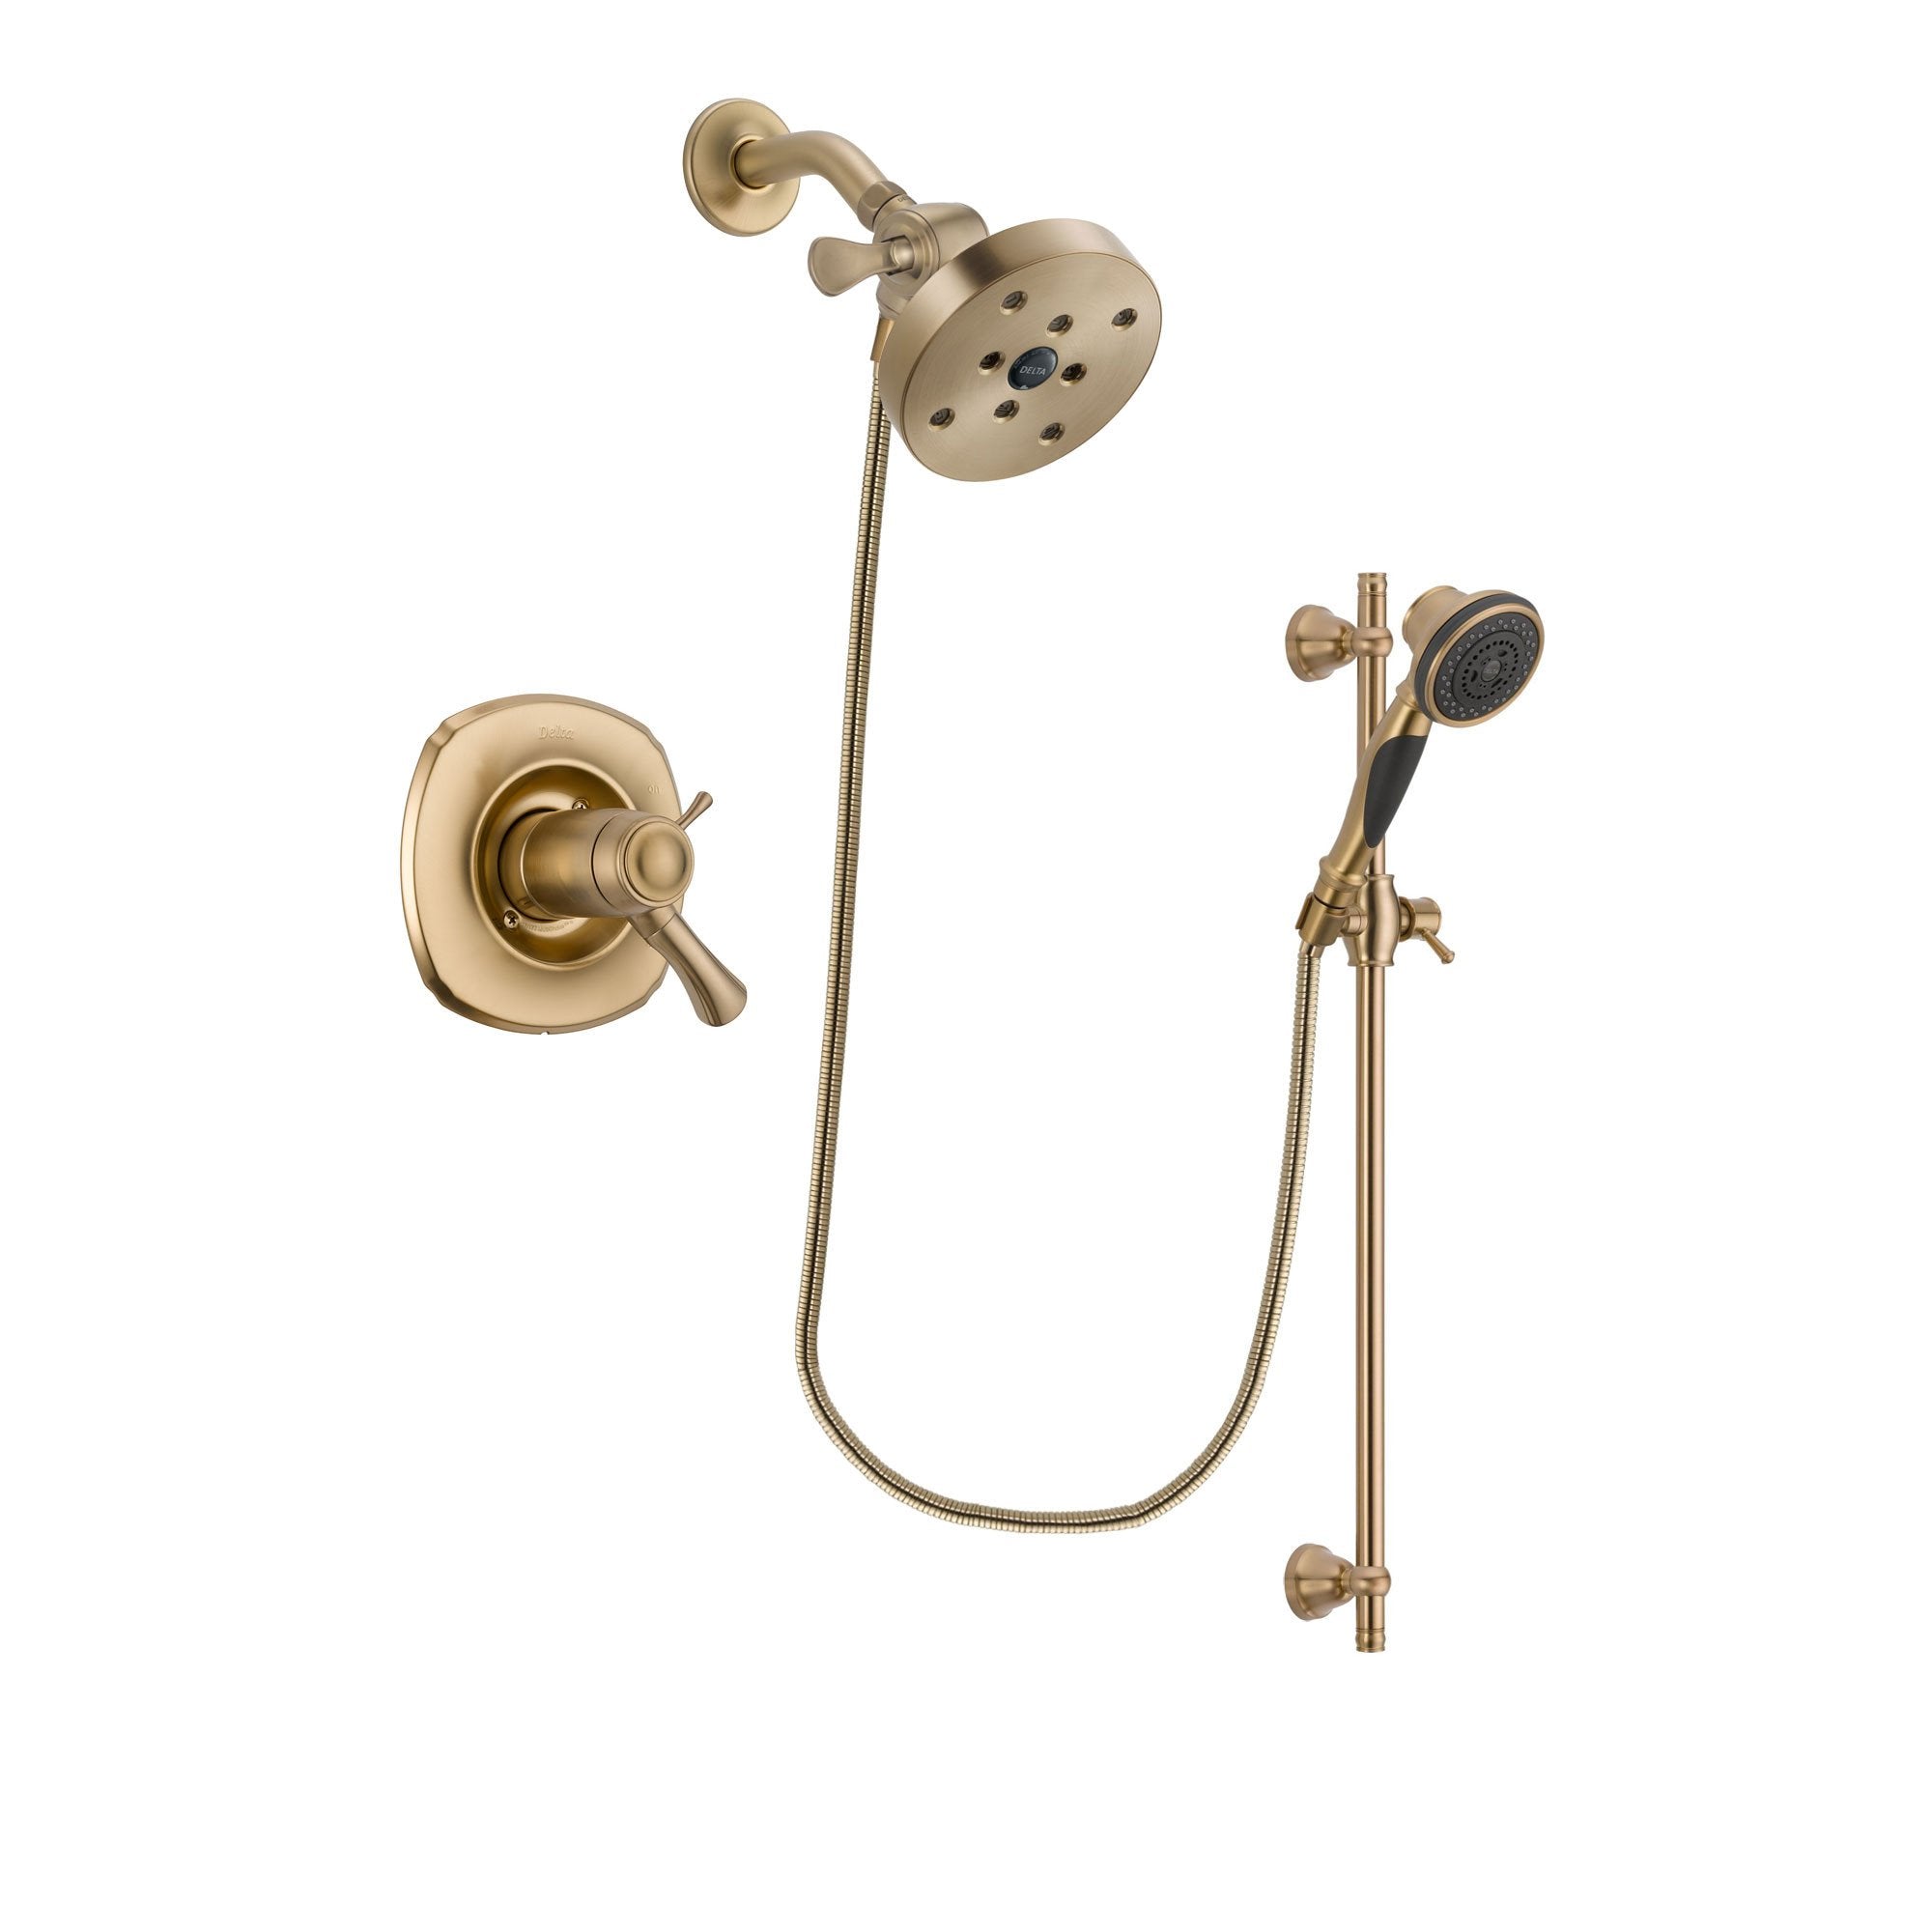 Delta Addison Champagne Bronze Finish Thermostatic Shower Faucet System Package with 5-1/2 inch Showerhead and Personal Handheld Shower Spray with Slide Bar Includes Rough-in Valve DSP3608V